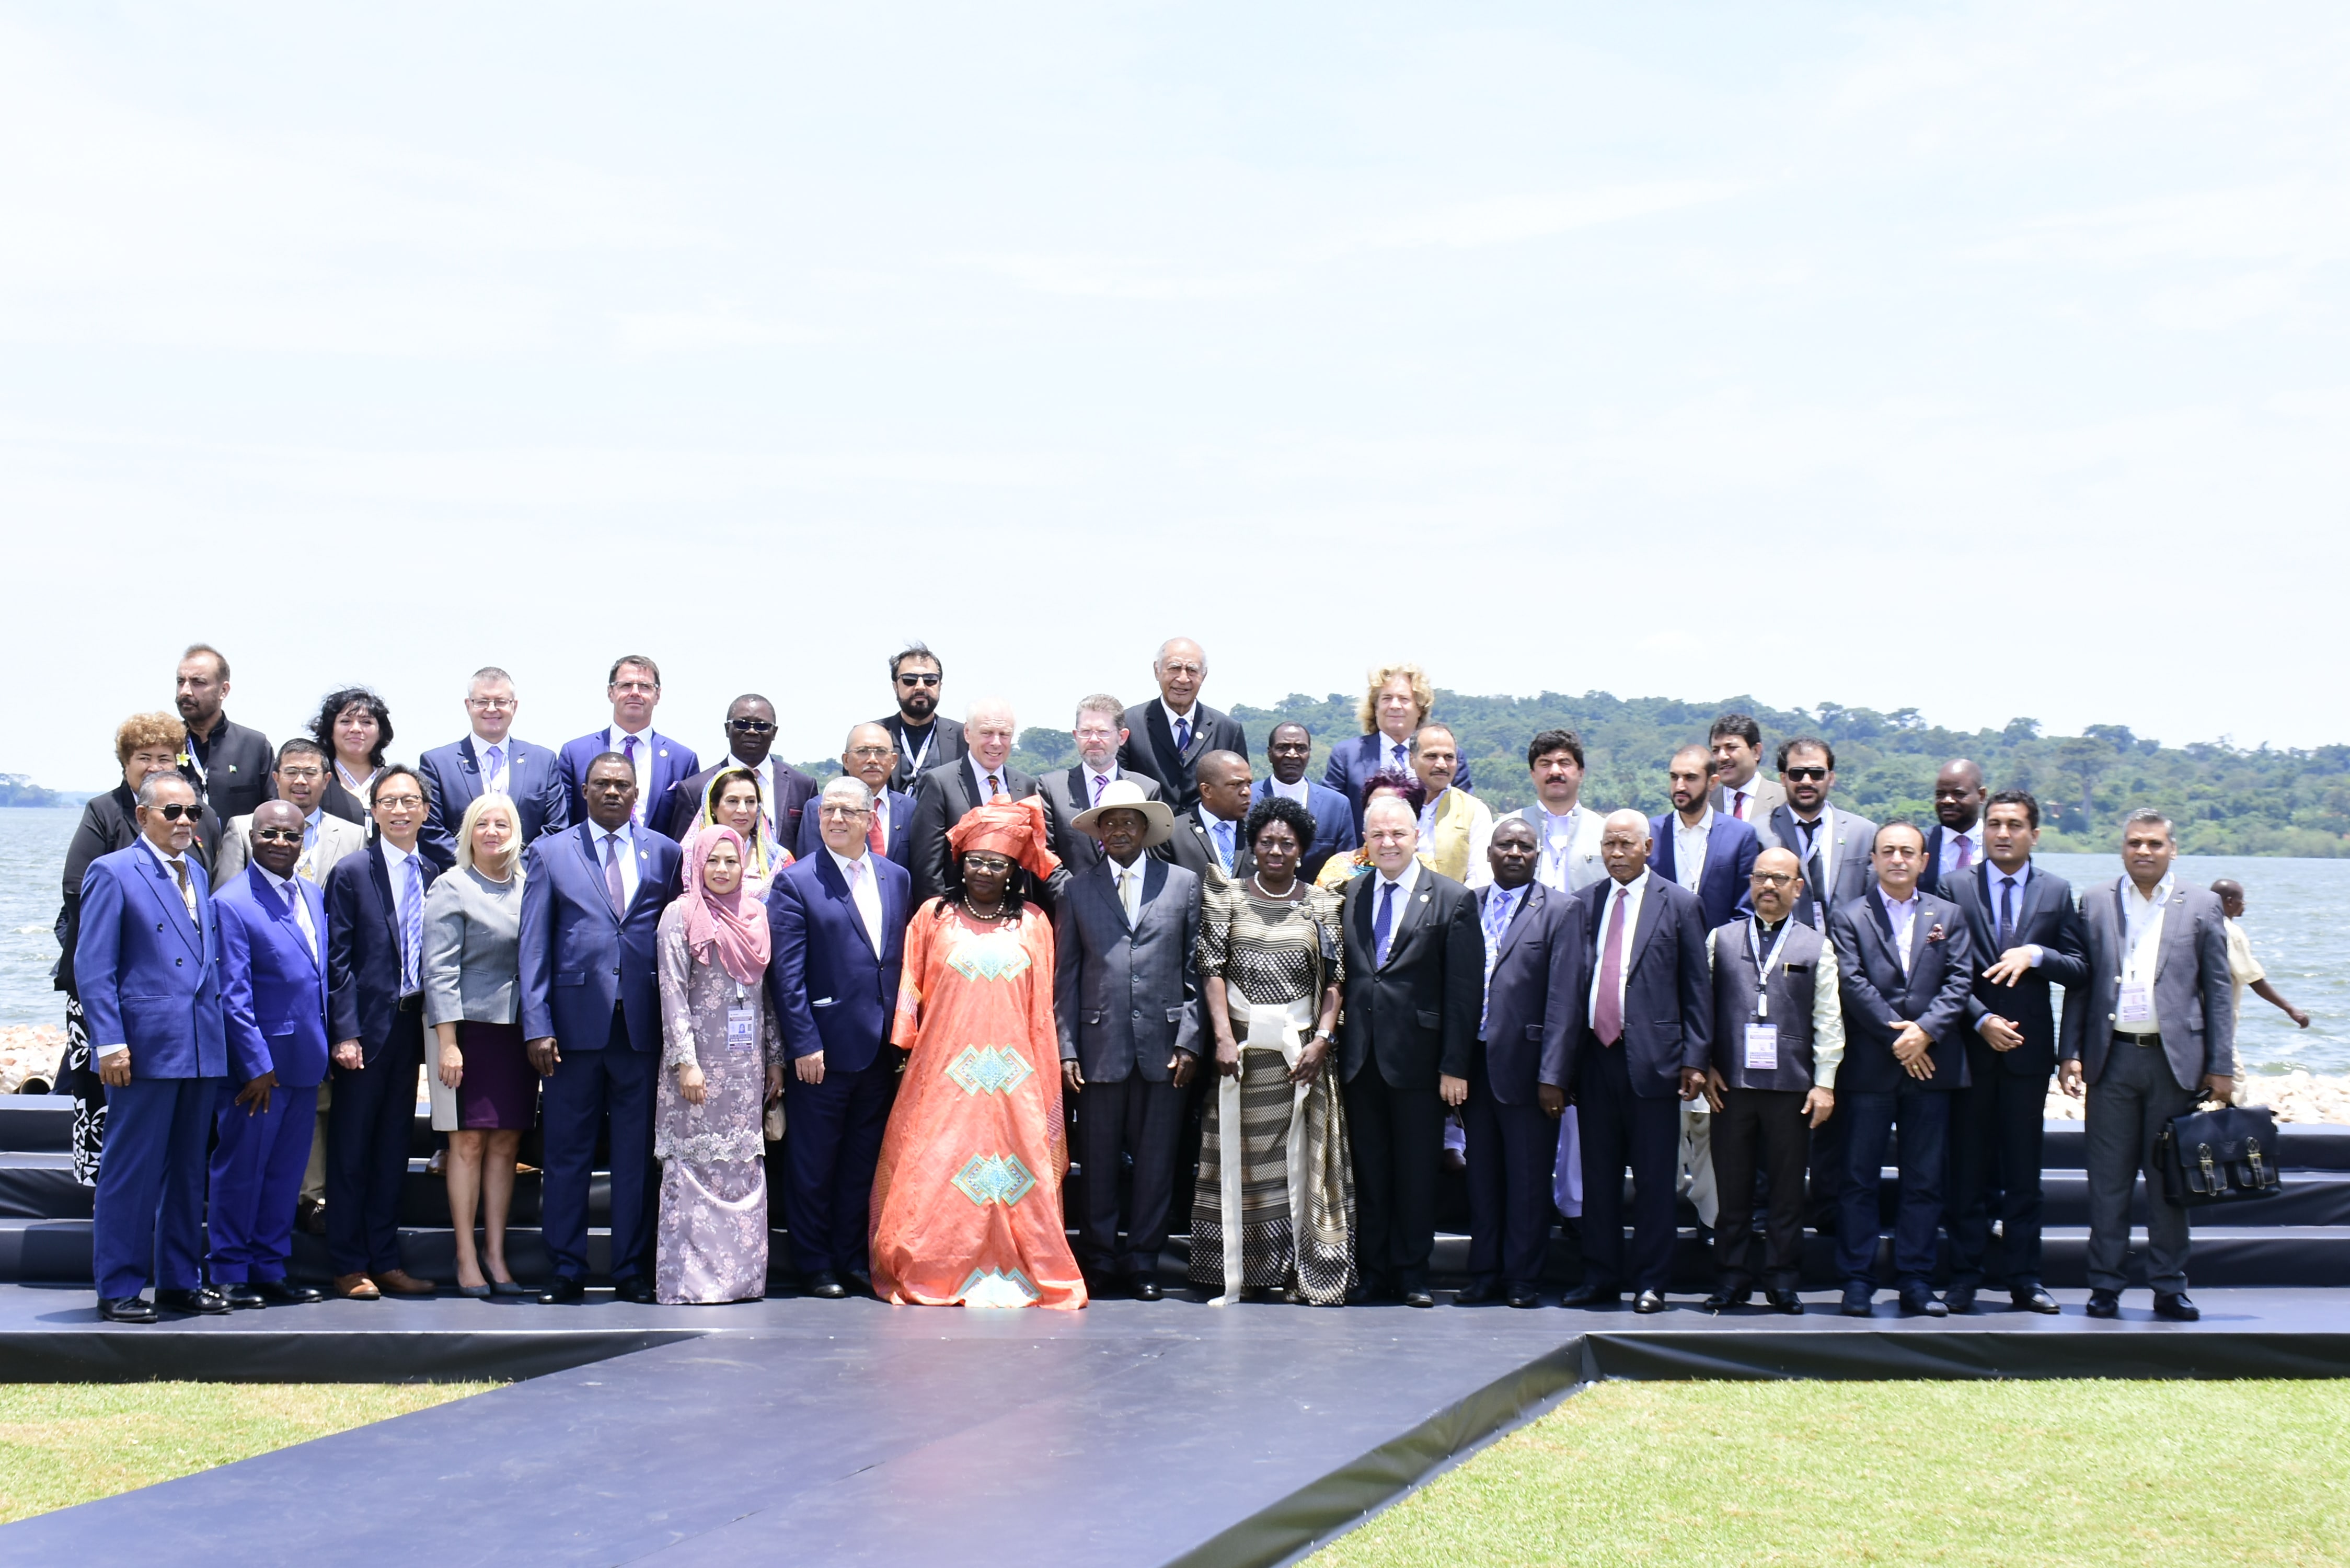 64th Commonwealth Parliamentary Conference